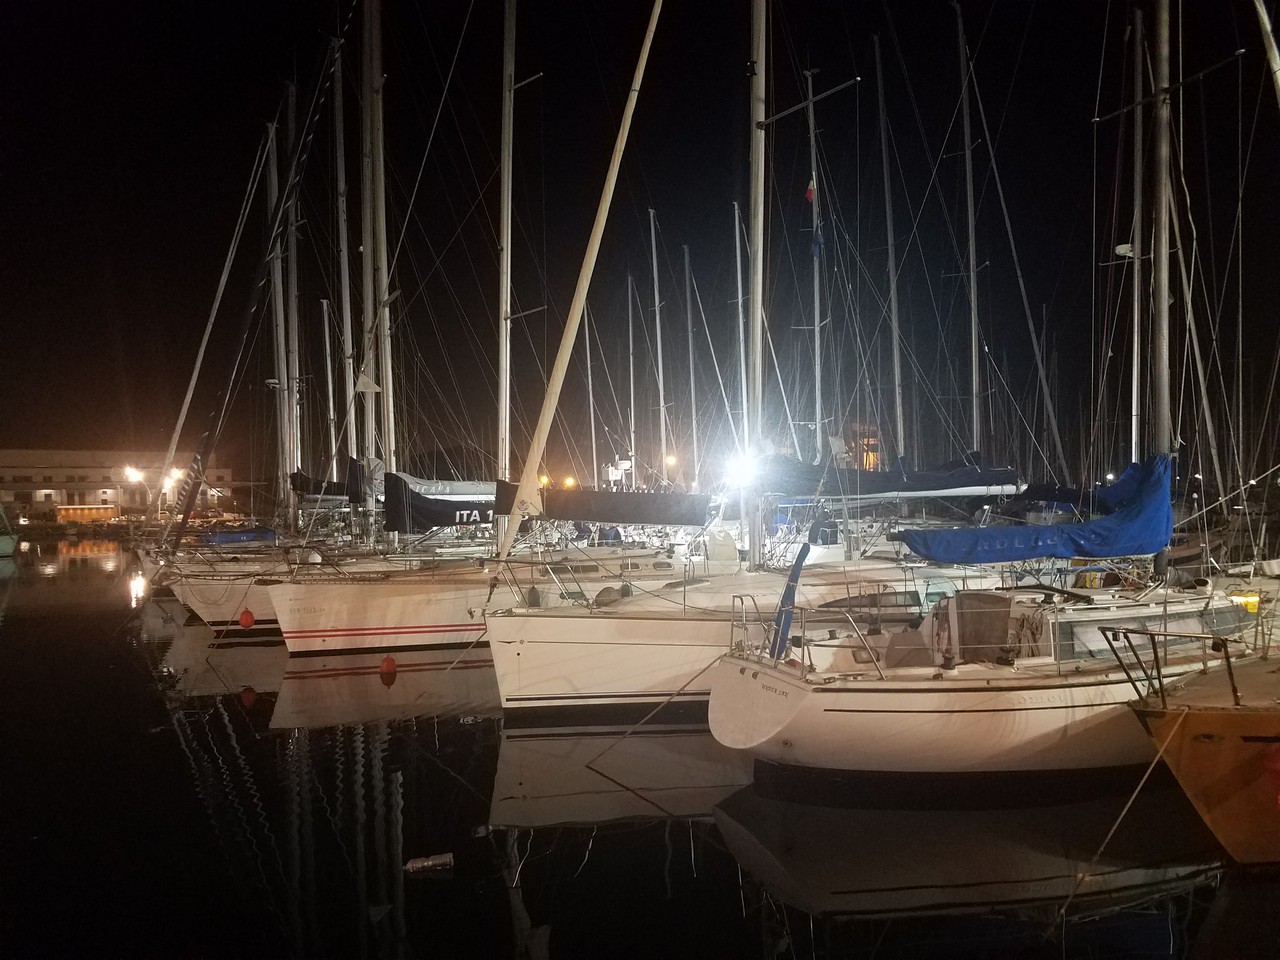 a group of boats on water at night